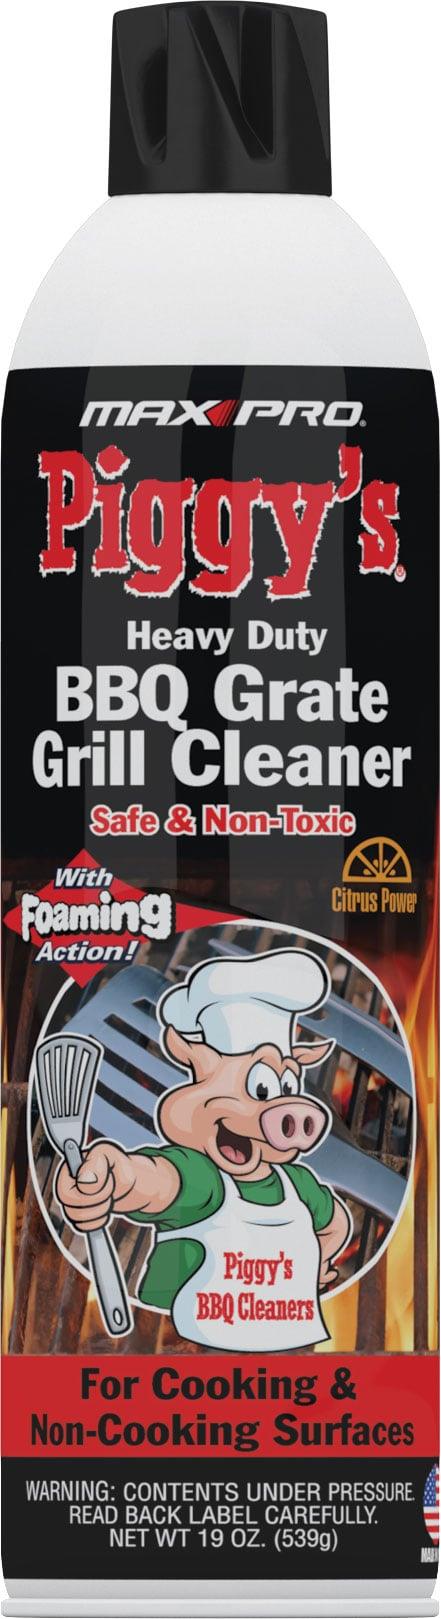 Buy Piggy's BBQ Grate Grill Cleaner 19oz on Sale